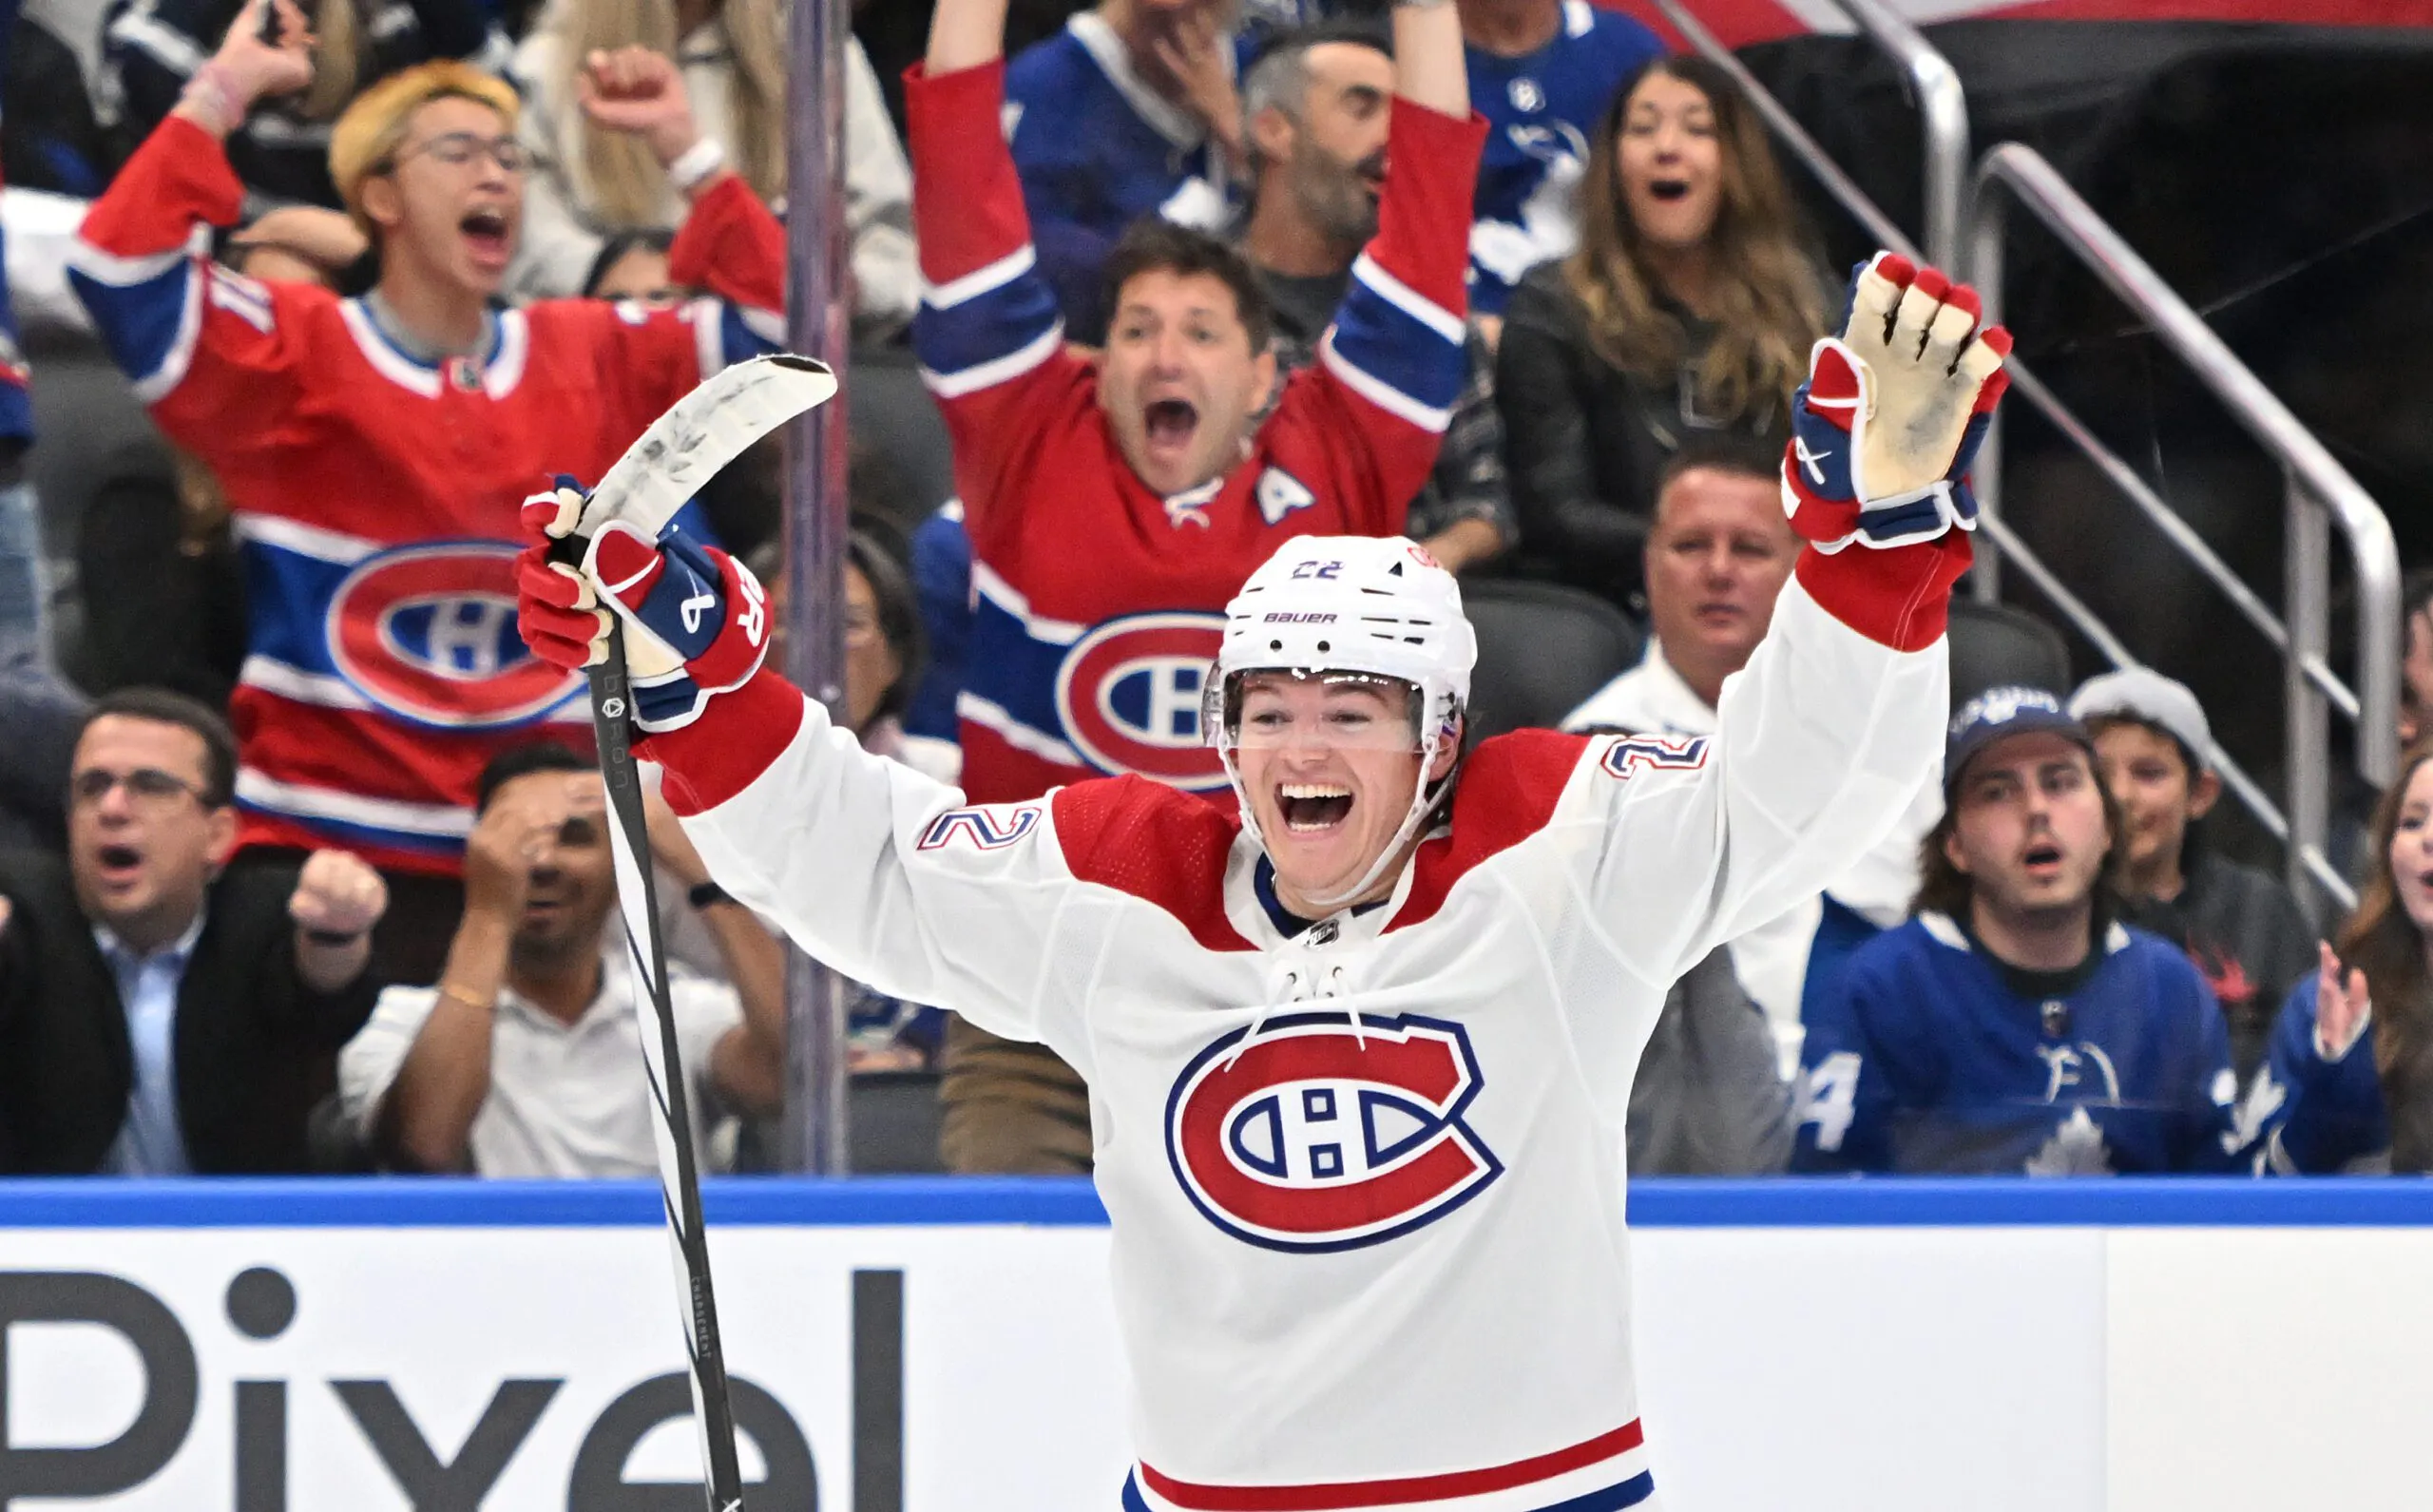 THE HABS FUTURE FIRST PAIR LOOKS NASTY - MONTREAL CANADIENS PROSPECT TALK 